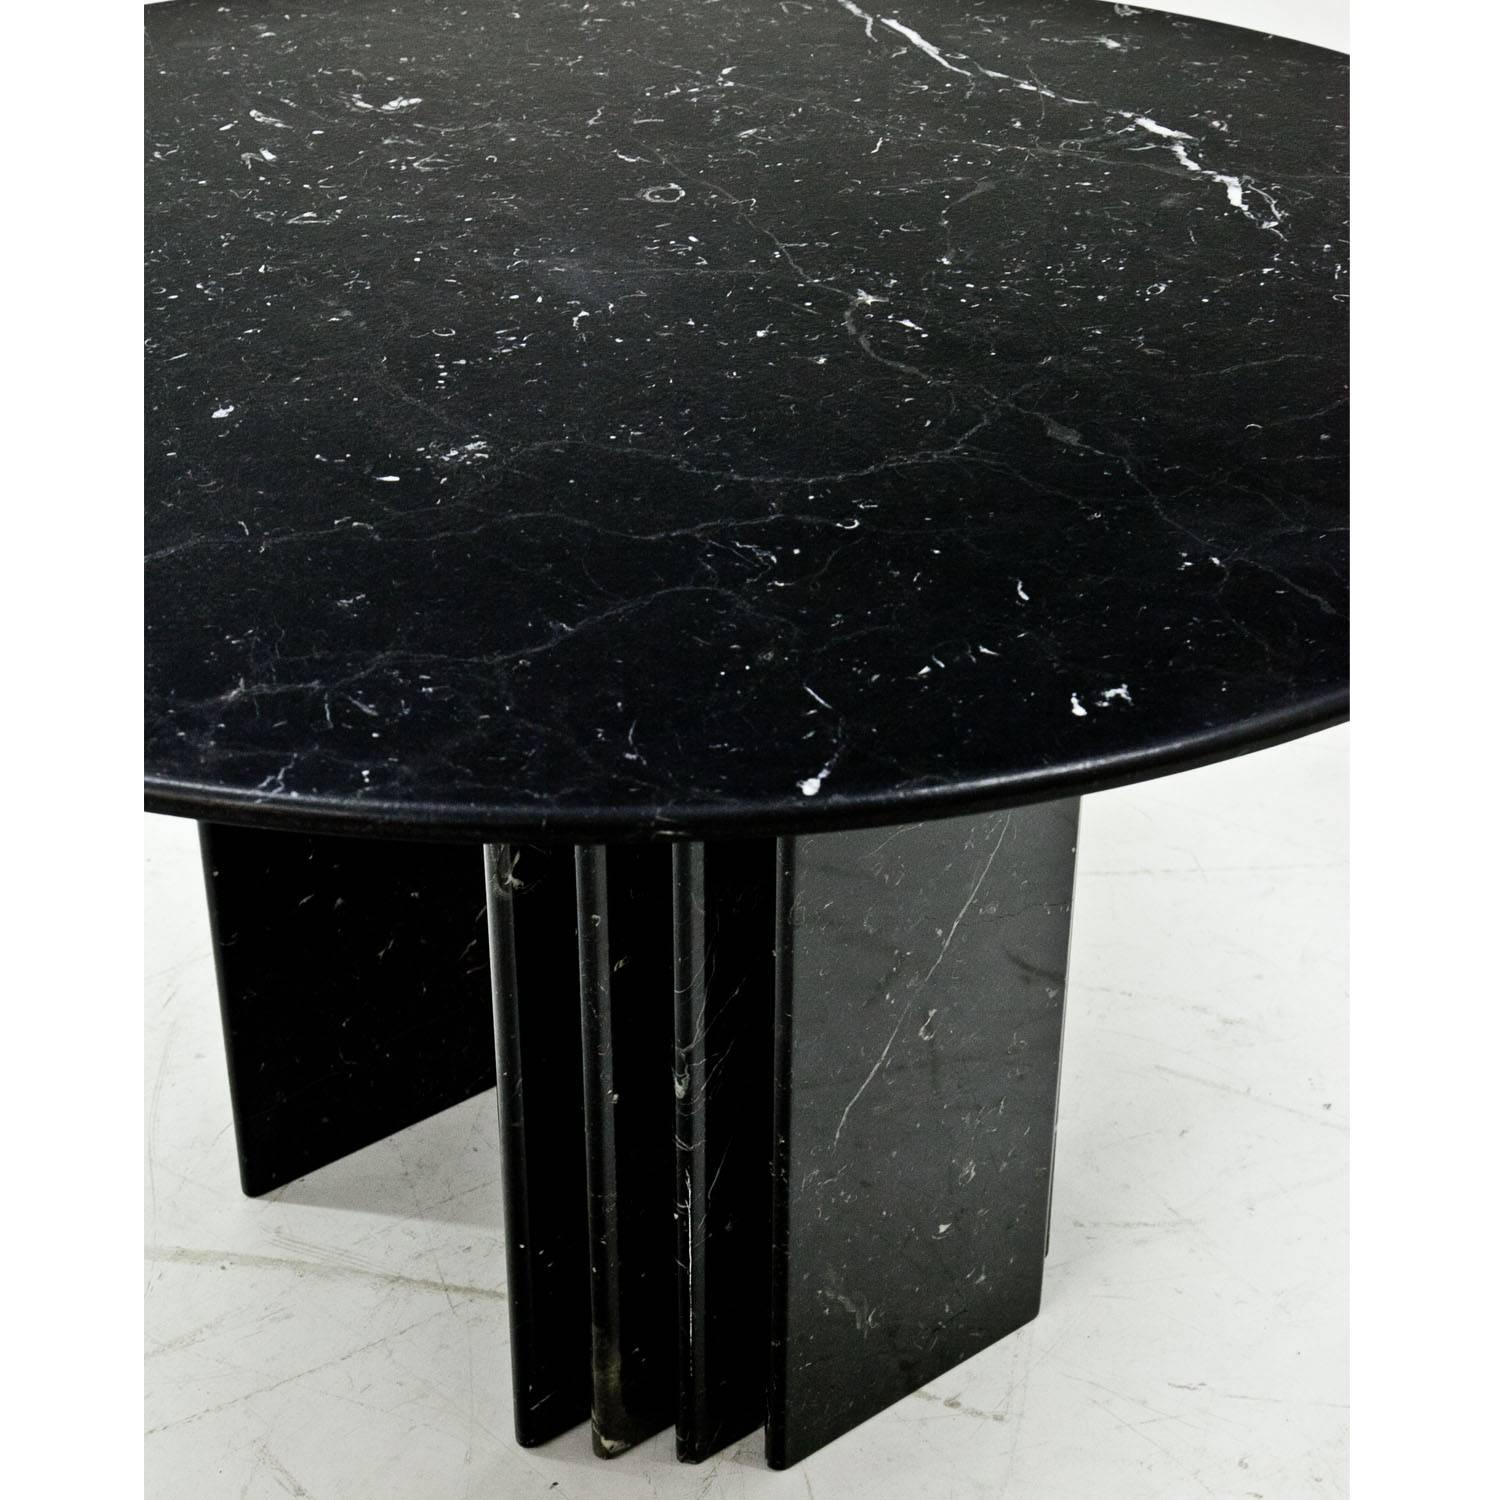 Large dining table out of black marble with white veins. The round tabletop rests on a two-legged marble base. Heavy and stable construction.